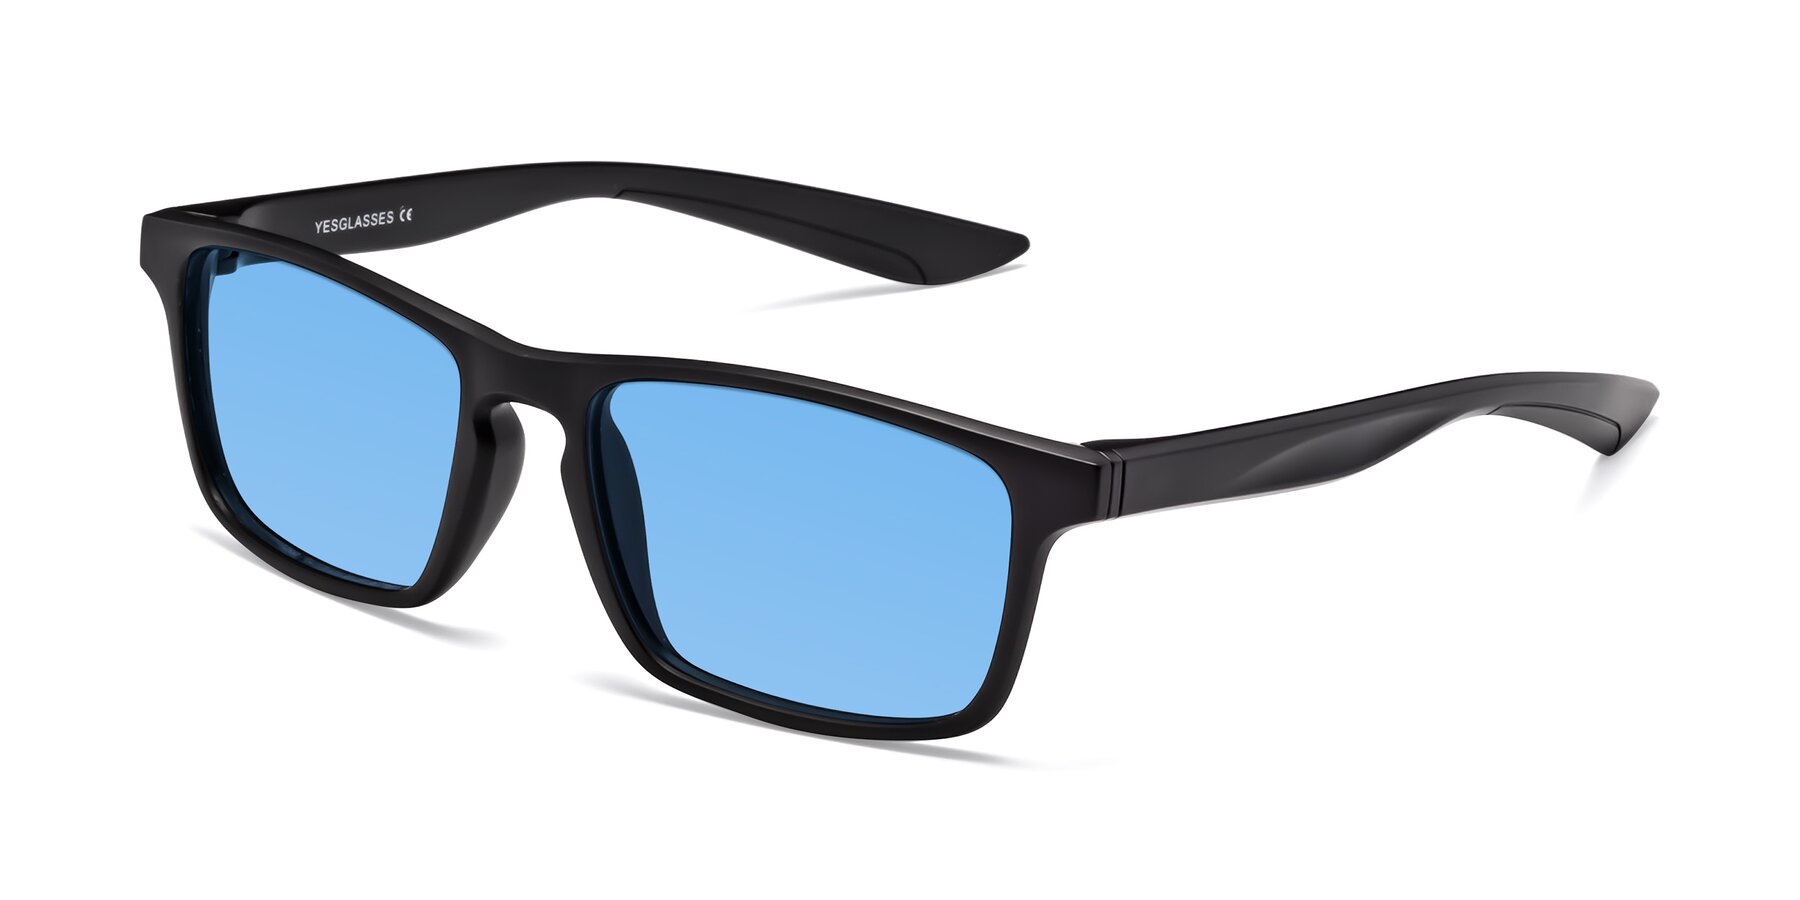 Angle of Passion in Matte Black with Medium Blue Tinted Lenses